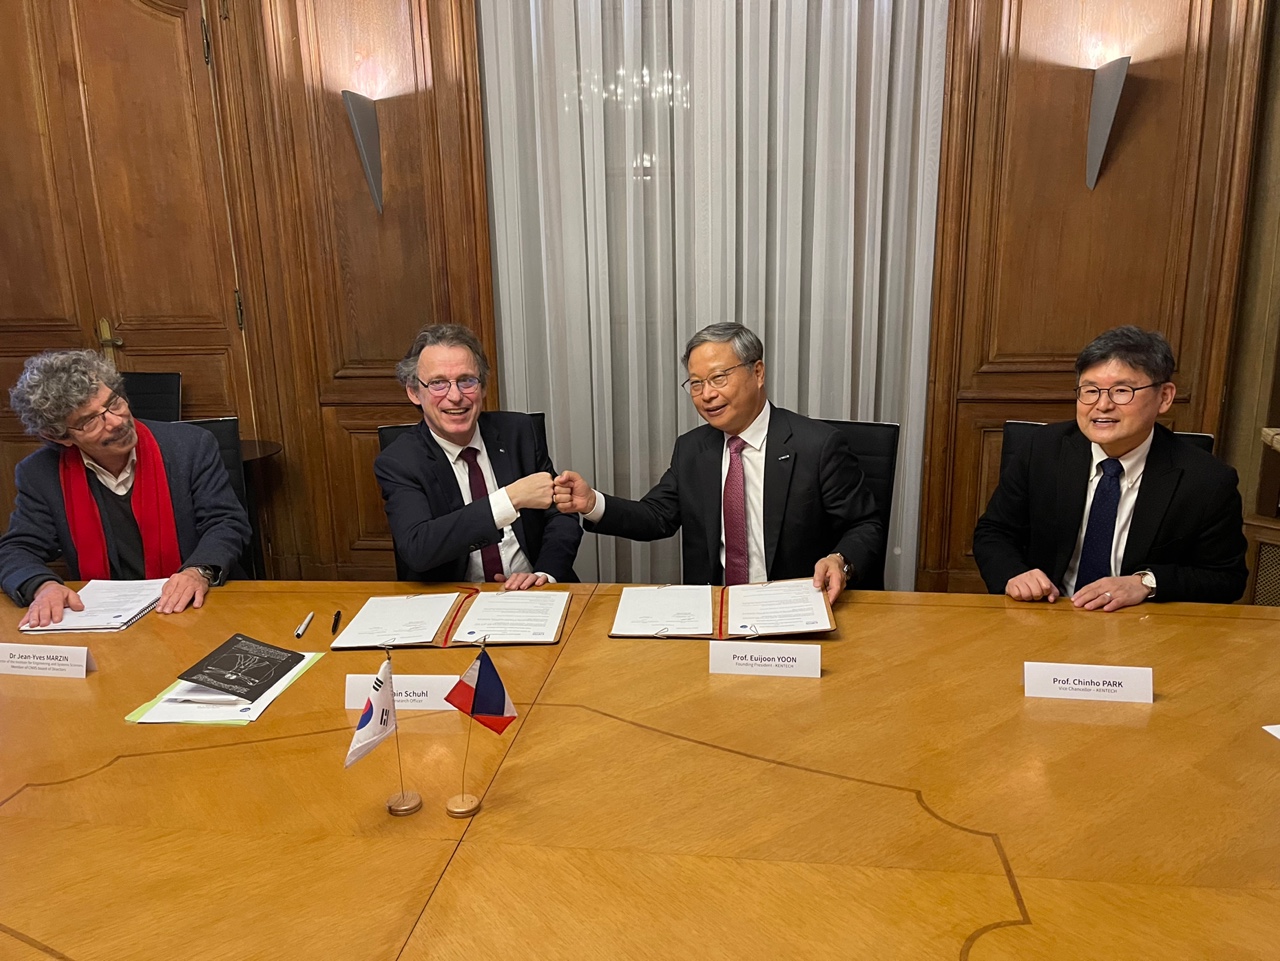 KENTECH and CNRS Partner to Develop Research Capabilities 